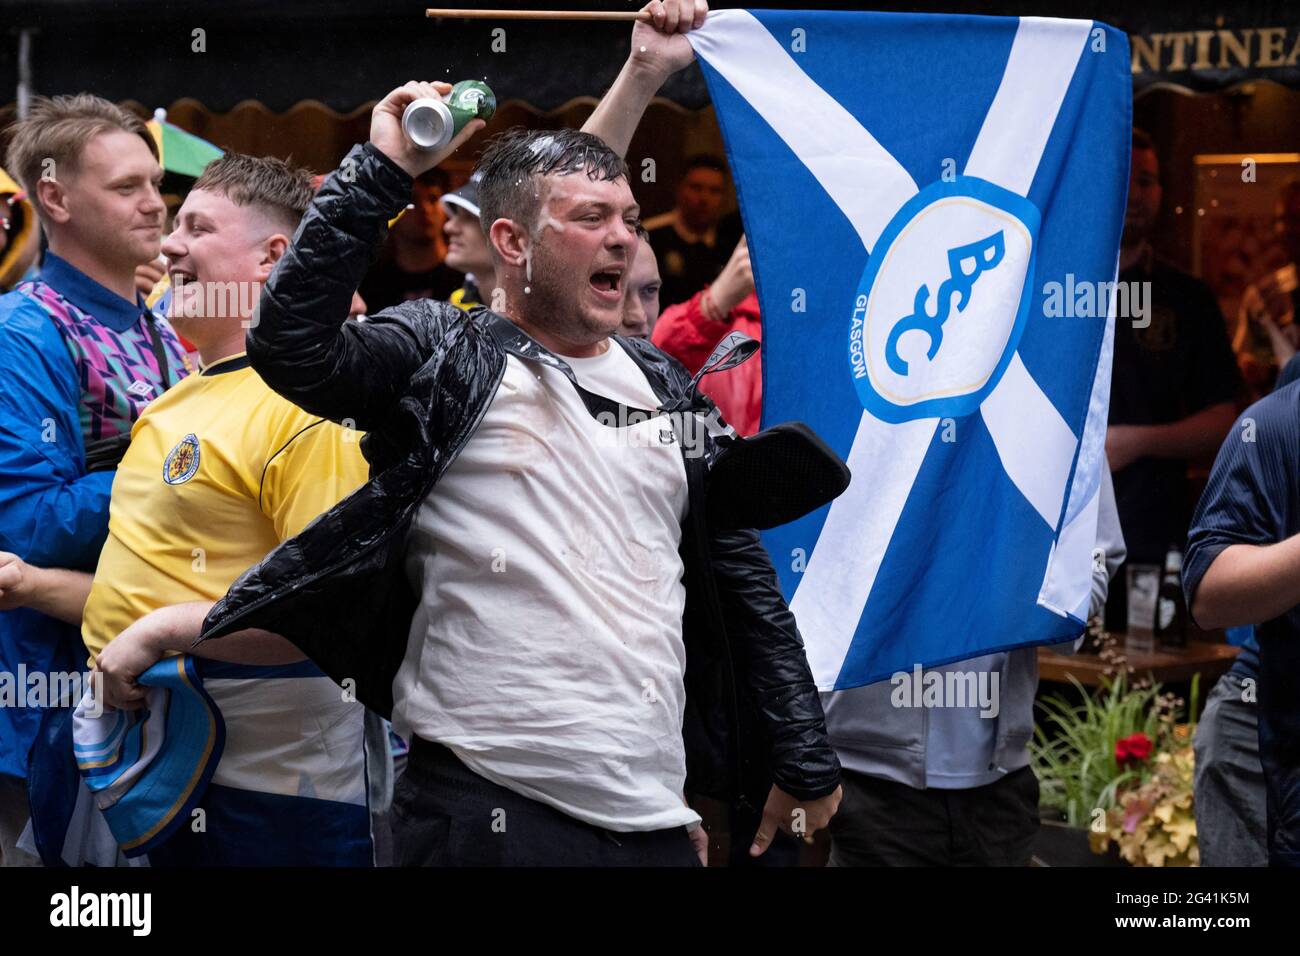 Scotland football supporters gather in the rain near London's Leicester  Square before tonight's match between England and Scotland at Wembley,  during the European Championships (postponed for a year because of the Covid